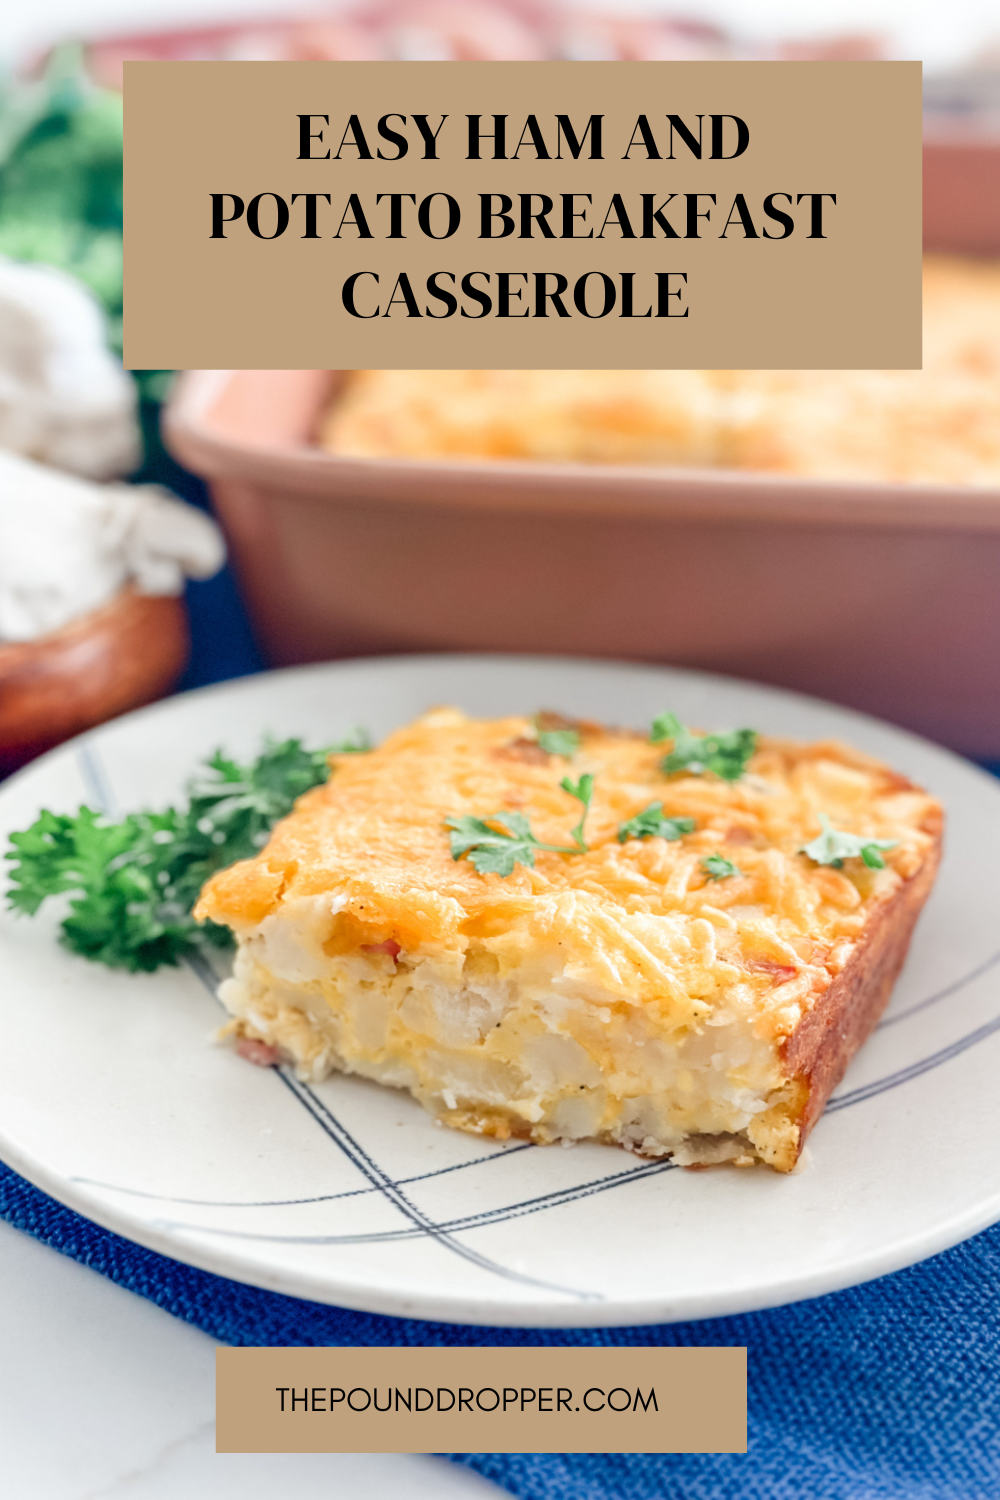 This Easy Ham and Potato Breakfast Casserole made with hash browns, ham, and cheese is a crowd pleaser! We look forward to eating every holiday at our house. Extremely delicious and easy to make!  via @pounddropper